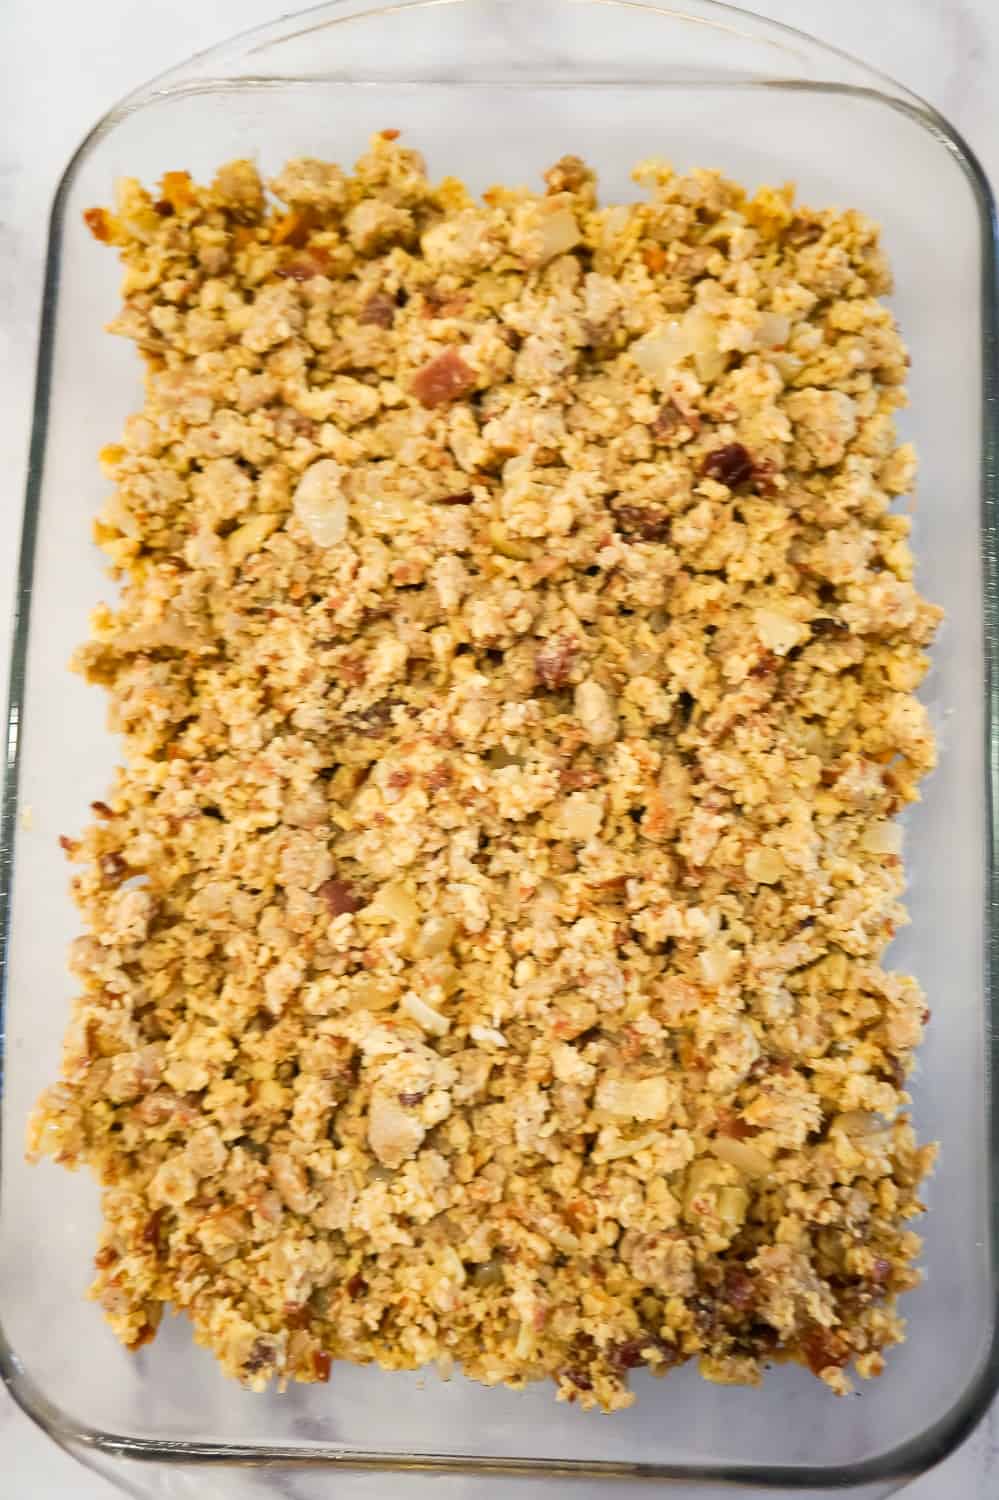 egg and sausage mixture in a baking pan